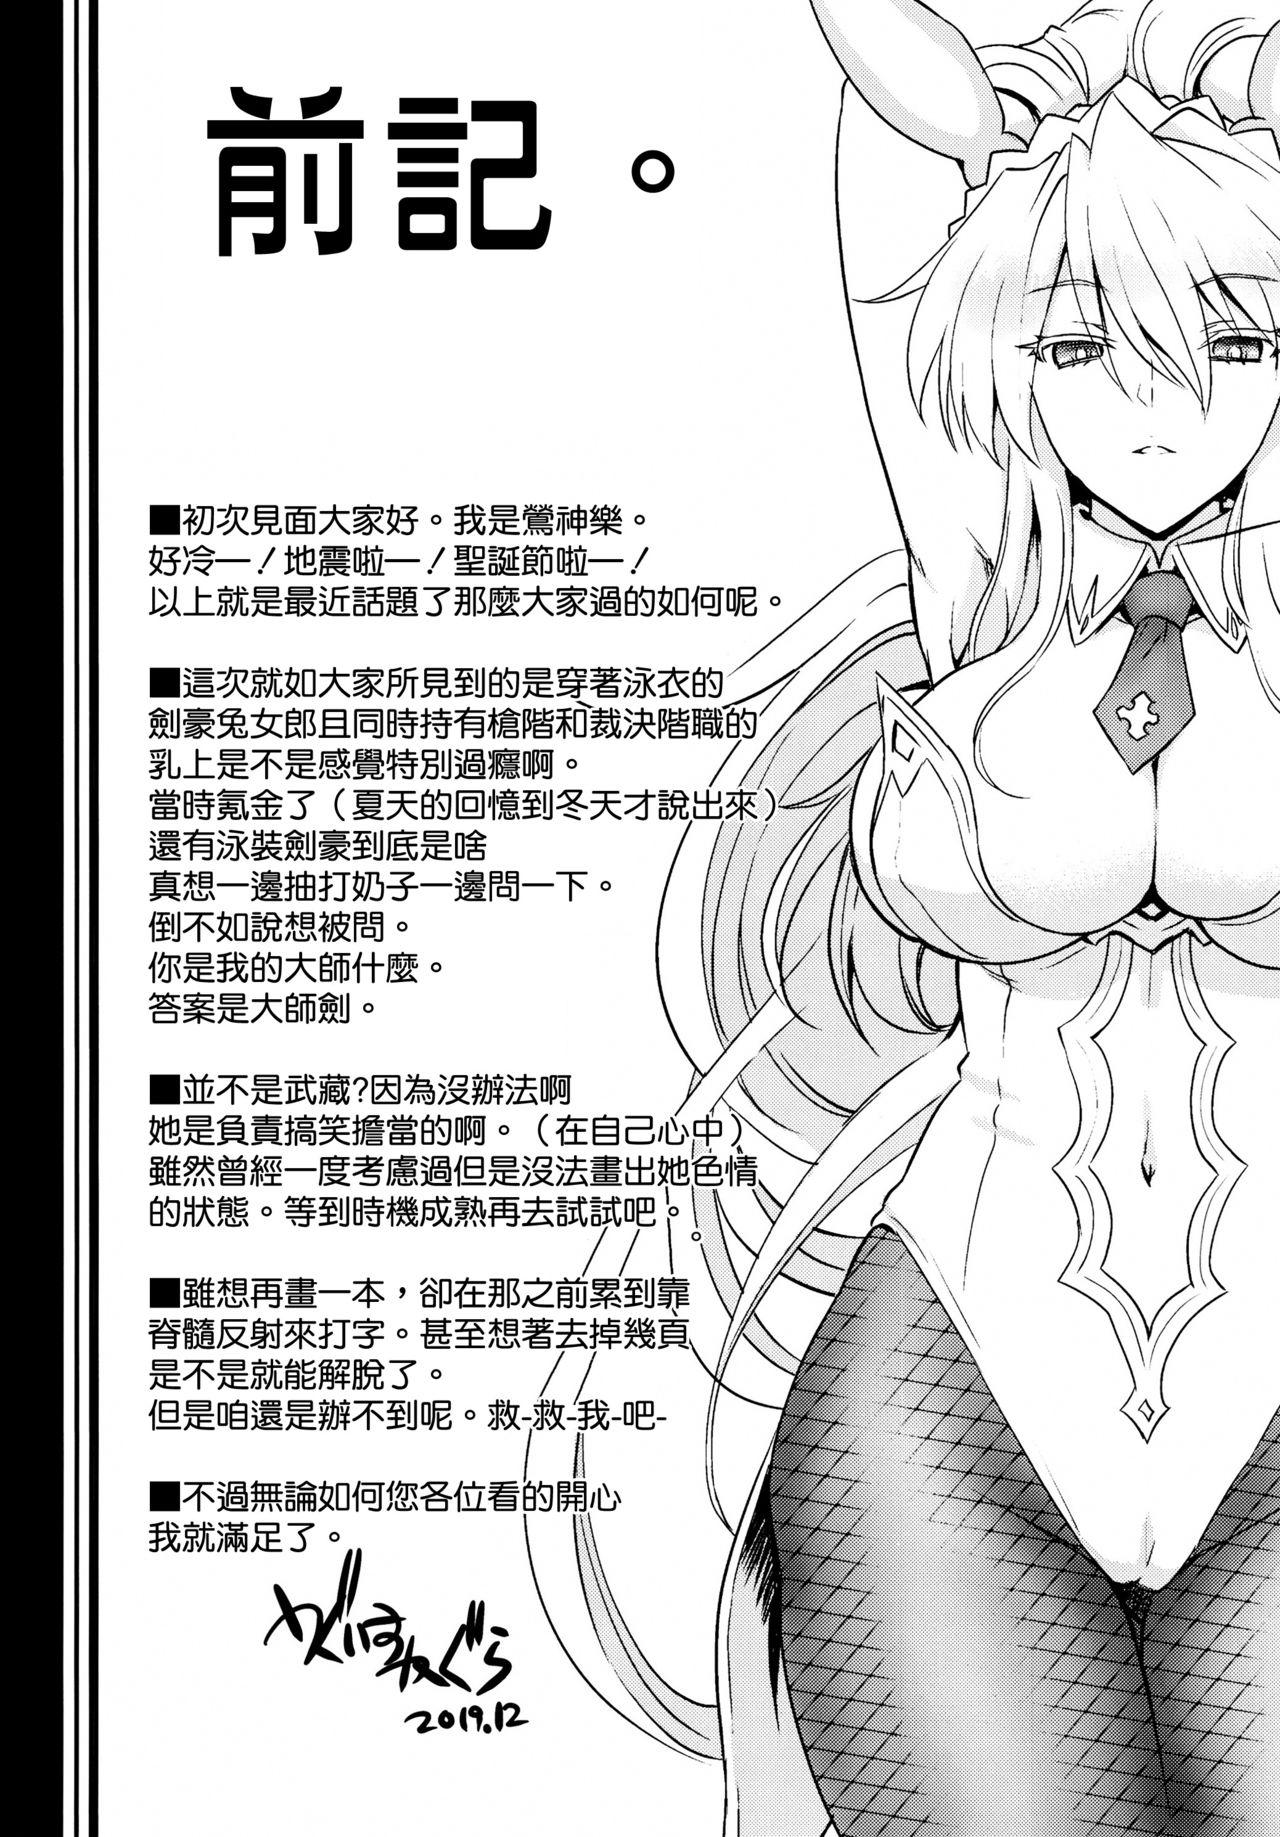 Reverse Cowgirl Place your bets please - Fate grand order Webcamsex - Page 4